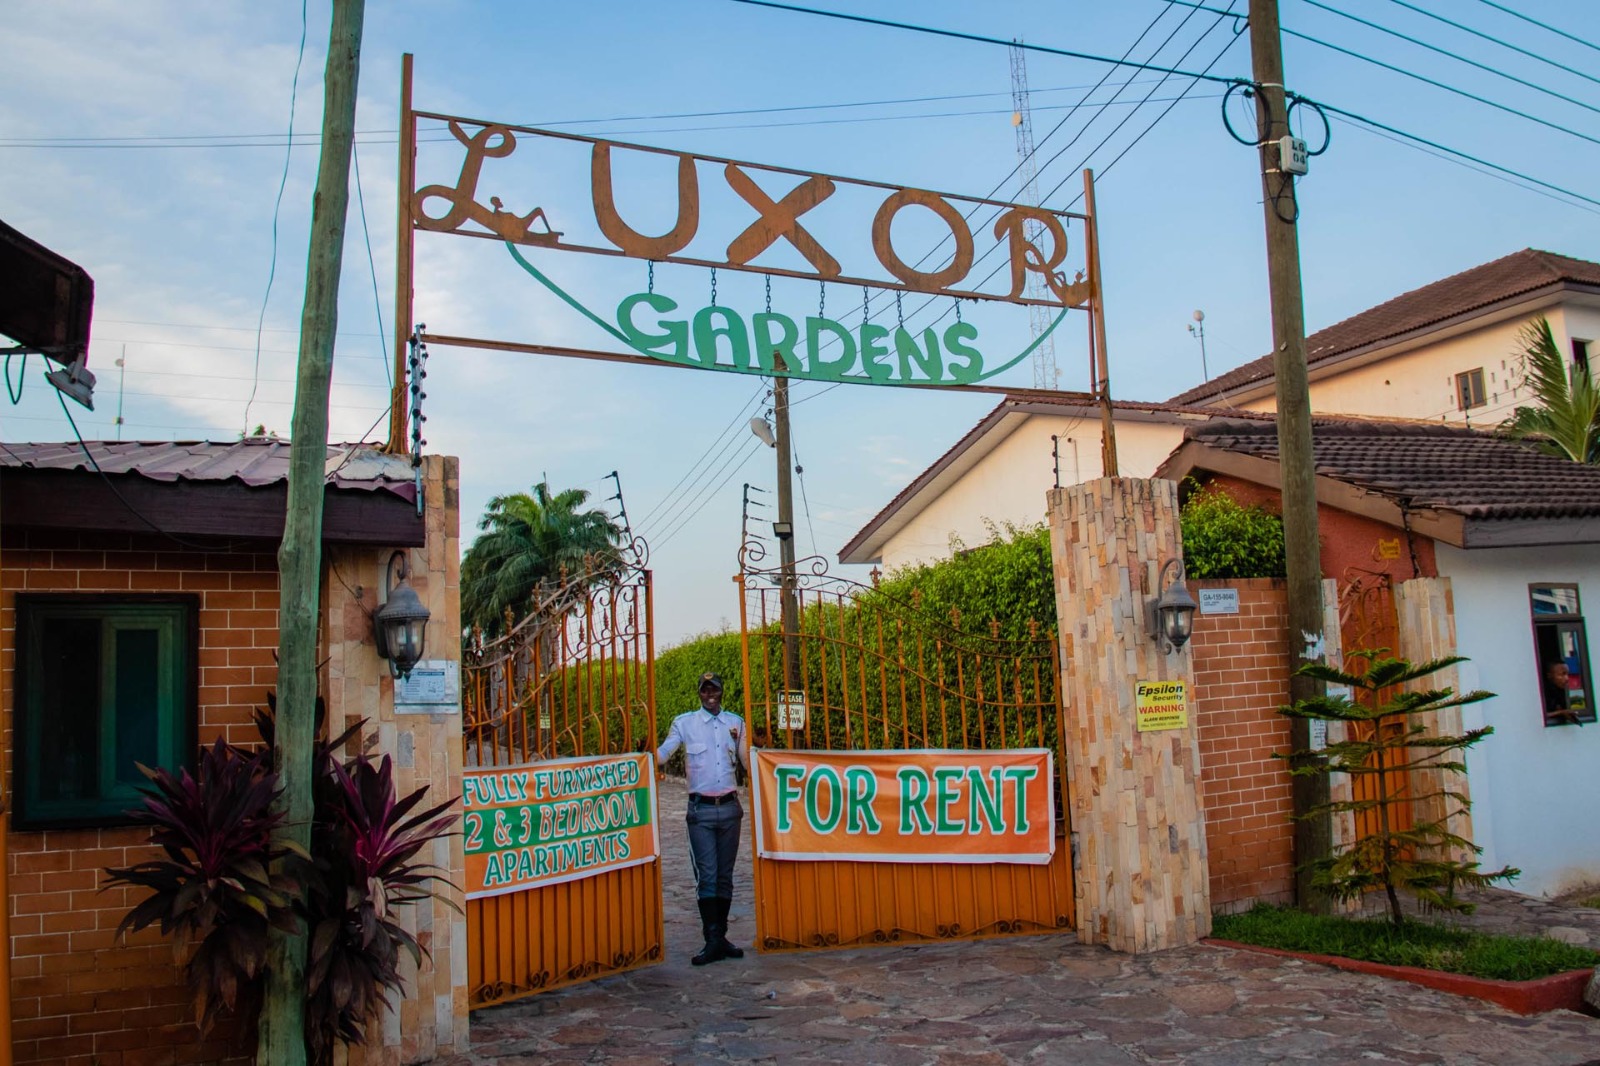 Luxor Garden Apartments: Your Oasis of Luxury and Connectivity in Accra